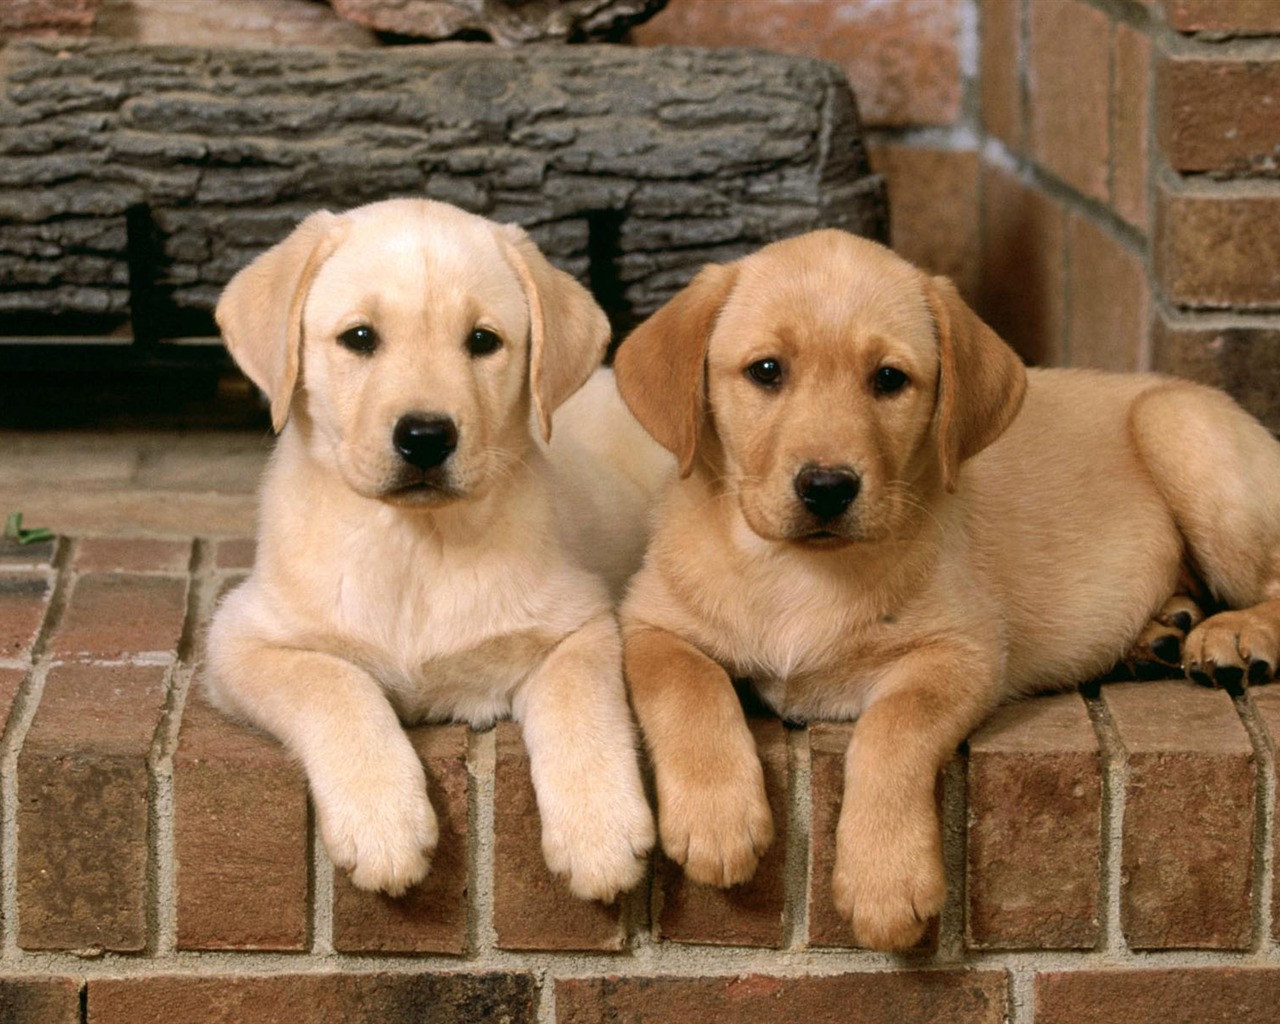 Puppy Photo HD wallpapers (2) #11 - 1280x1024